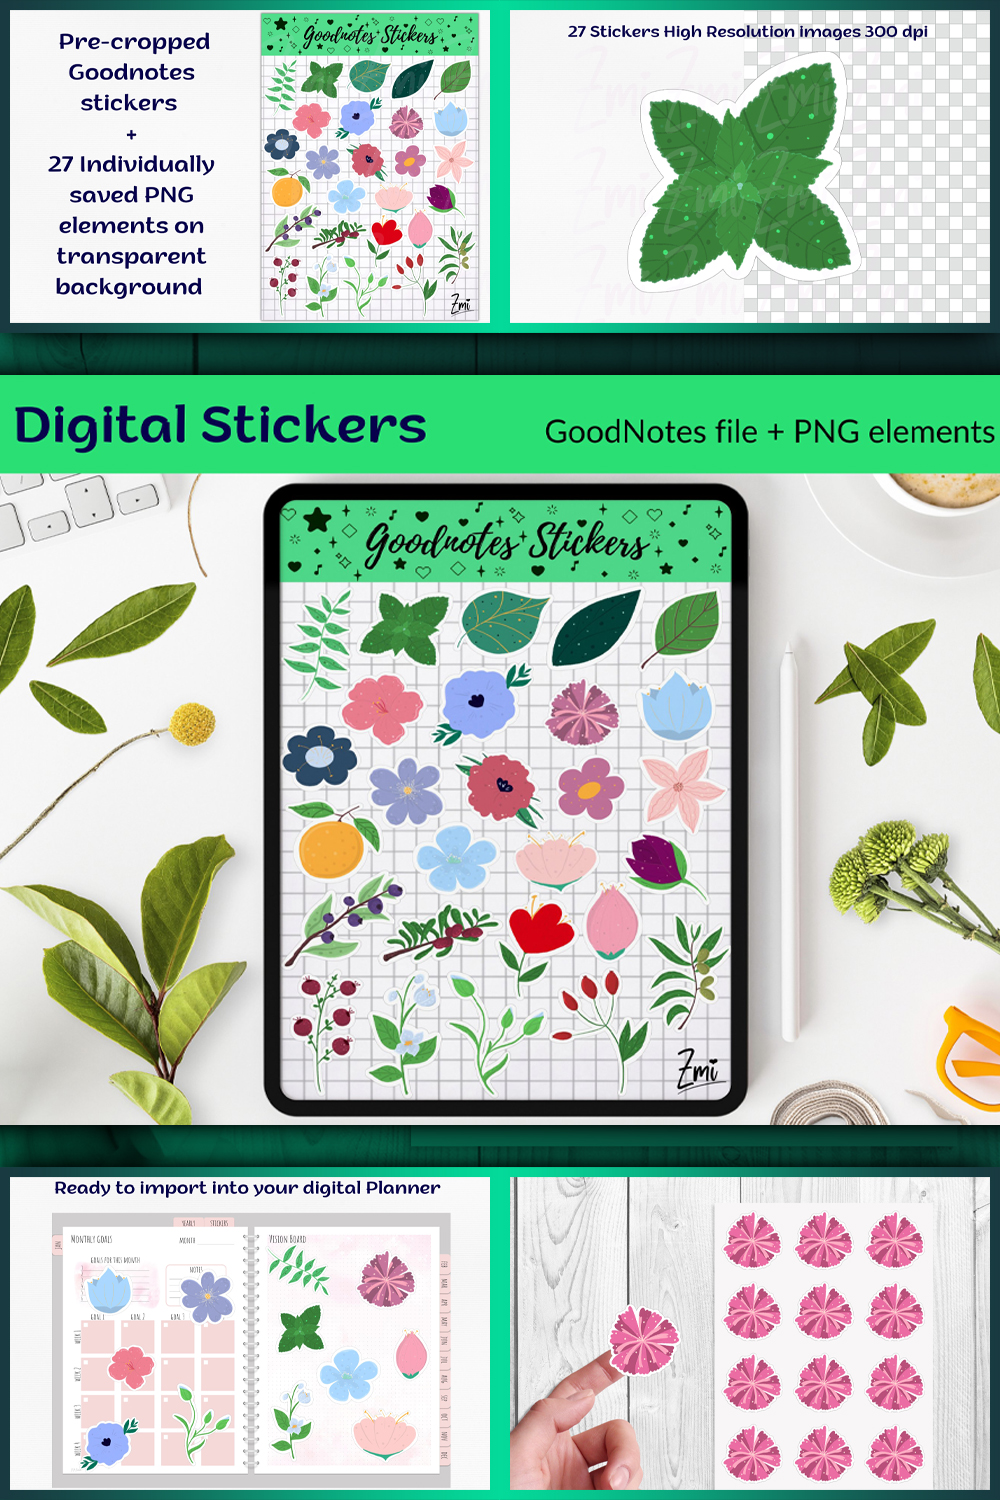 Illustrations botanical digital stickers png and goodnotes file of pinterest.